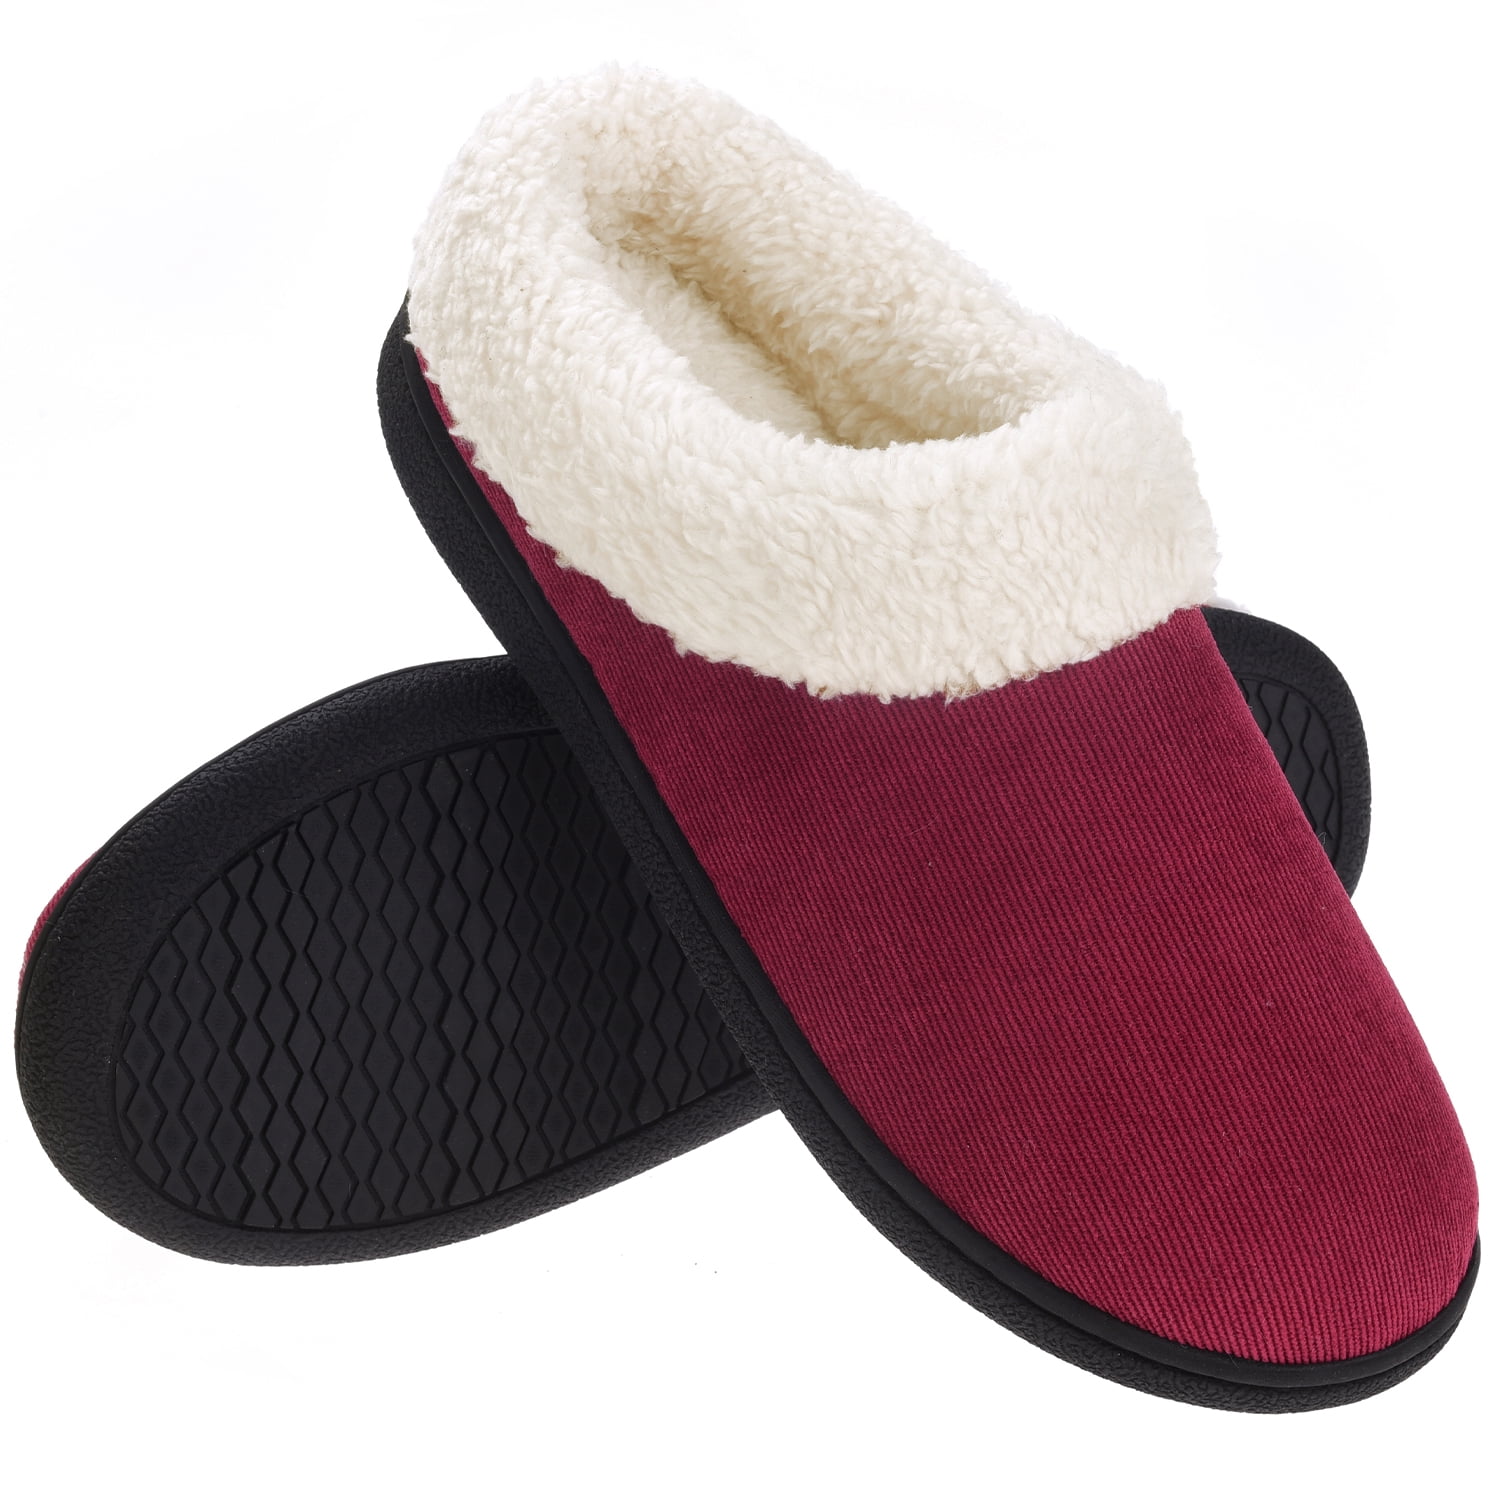 Slippers for Women Fuzzy House Slip on Indoor Outdoor Bedroom Furry Fleece Lined Ladies Comfy Memory Foam Female Home Shoes Anti-Skid Rubber Hard Sole 